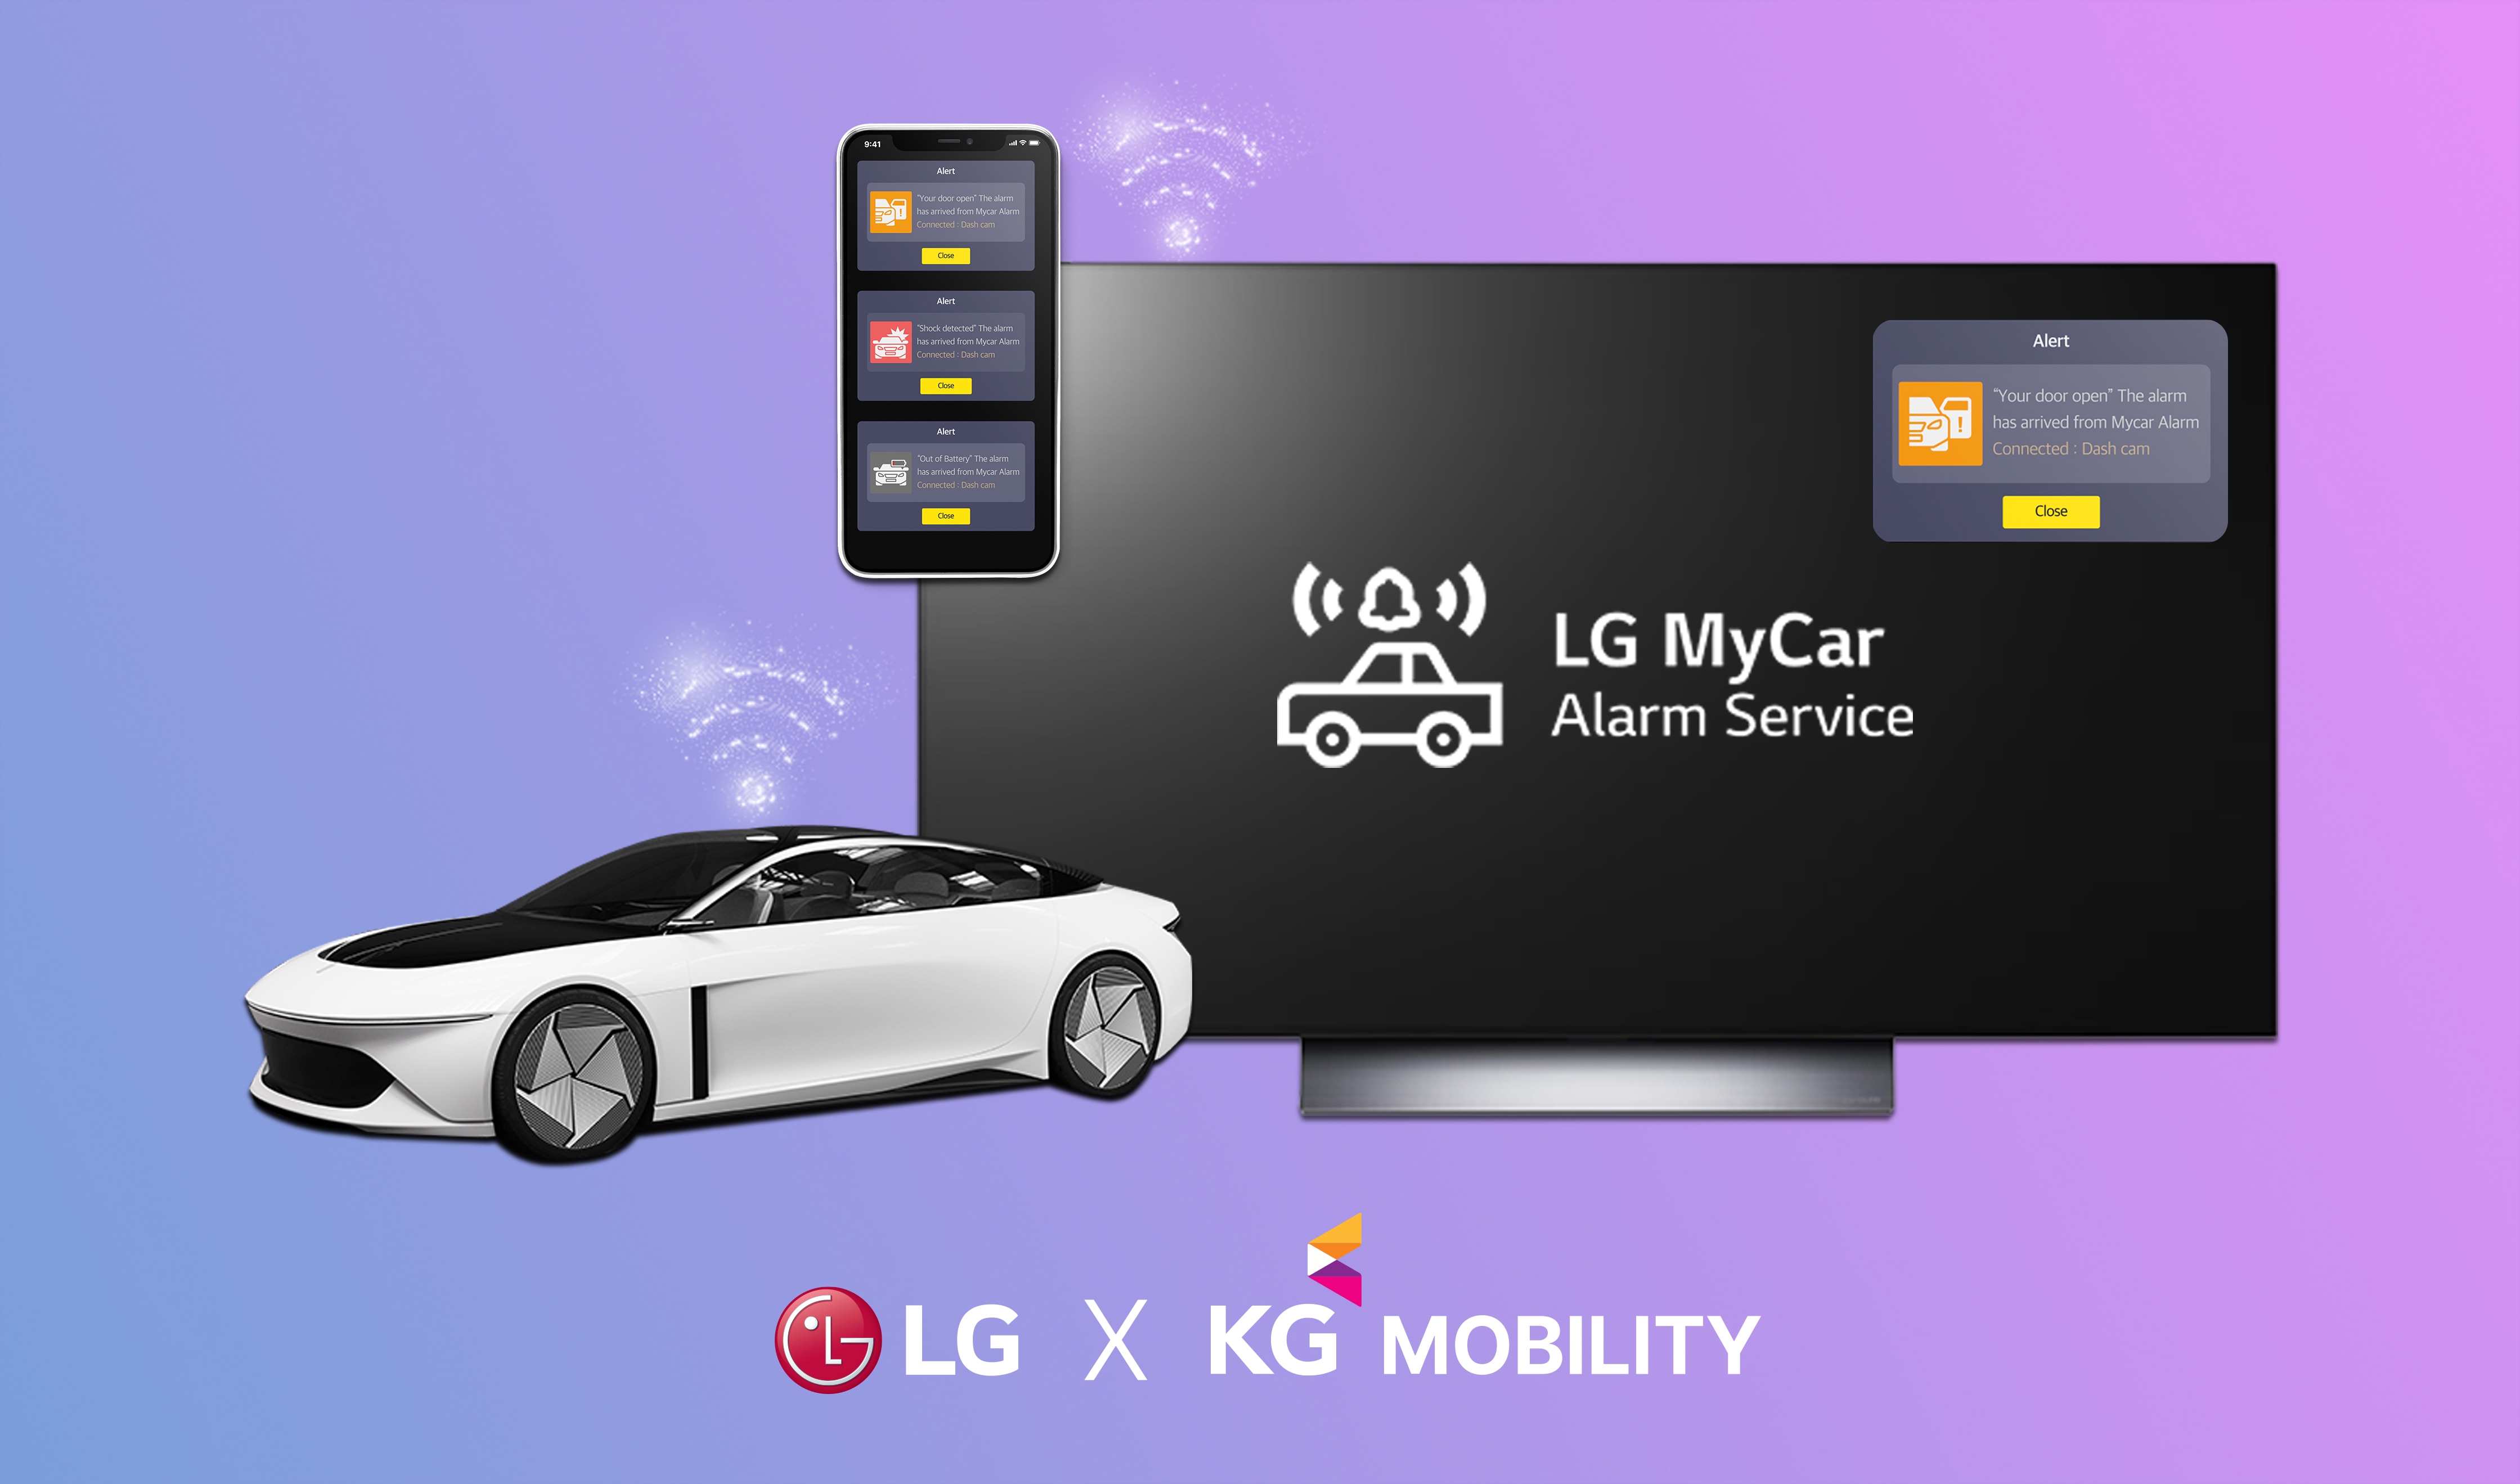 LG's 'MyCar Alarm Service' Integrates with KG Mobility's New Cars